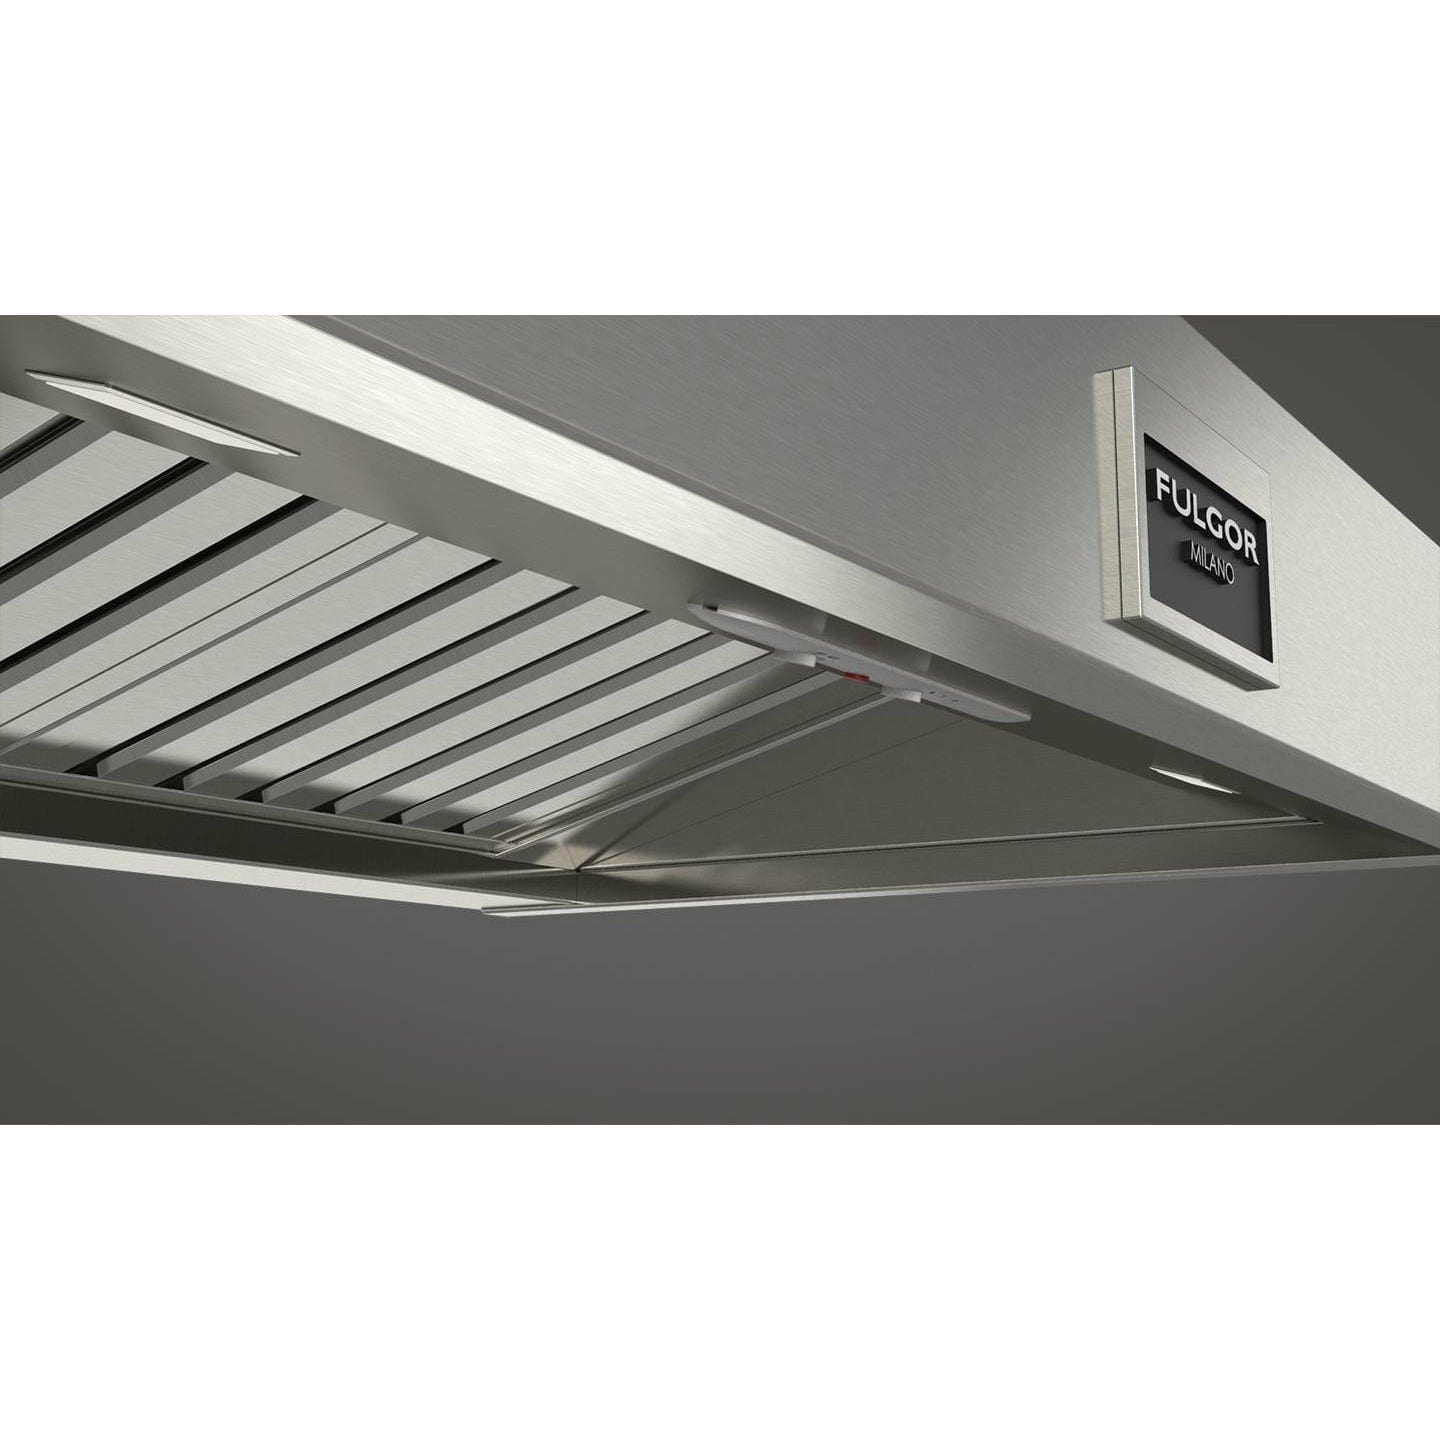 Fulgor Milano 36" Professional Wall Mount Hood with 600 CFM Internal Blower, Stainless Steel - F6PH36S1 Hoods F6PH36S1 Luxury Appliances Direct